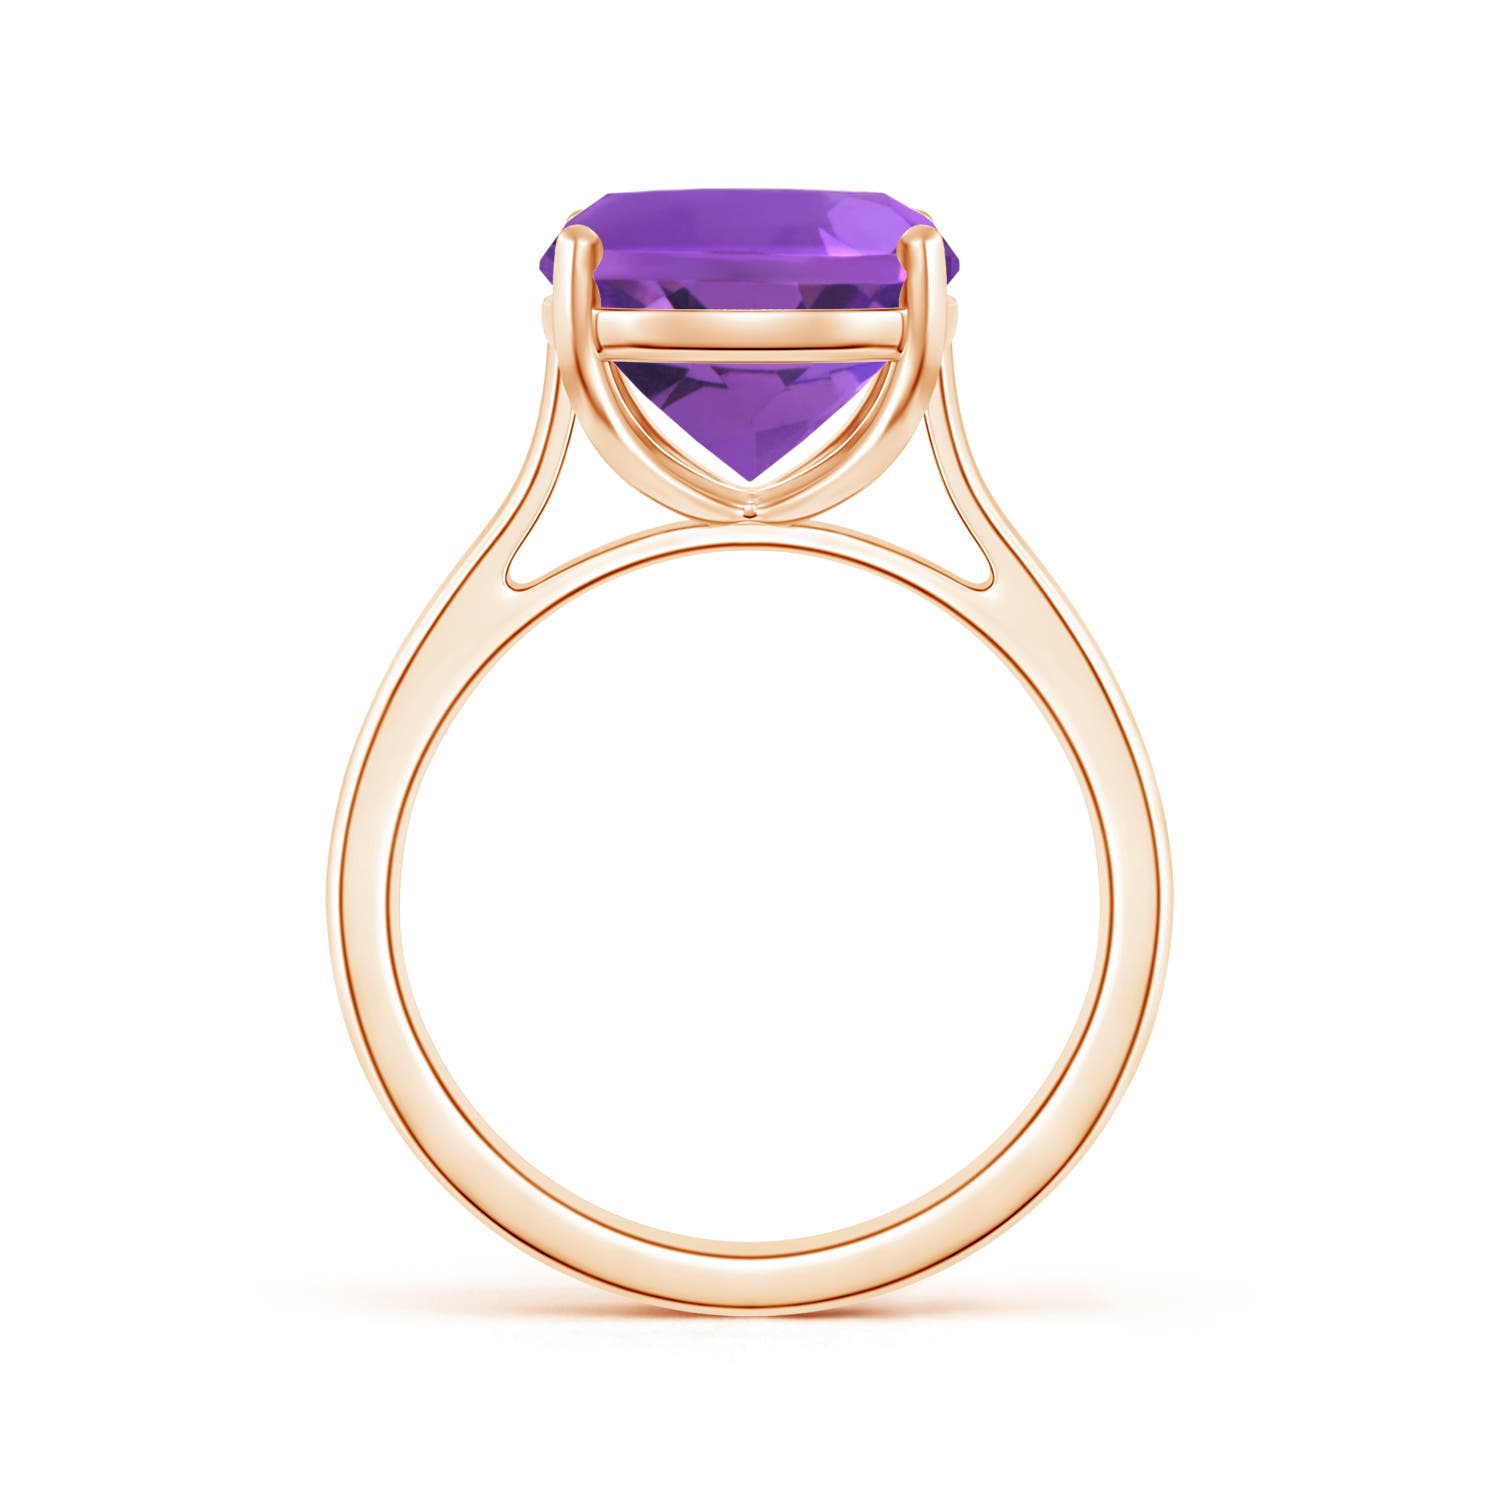 AAA - Amethyst / 4.64 CT / 14 KT Rose Gold